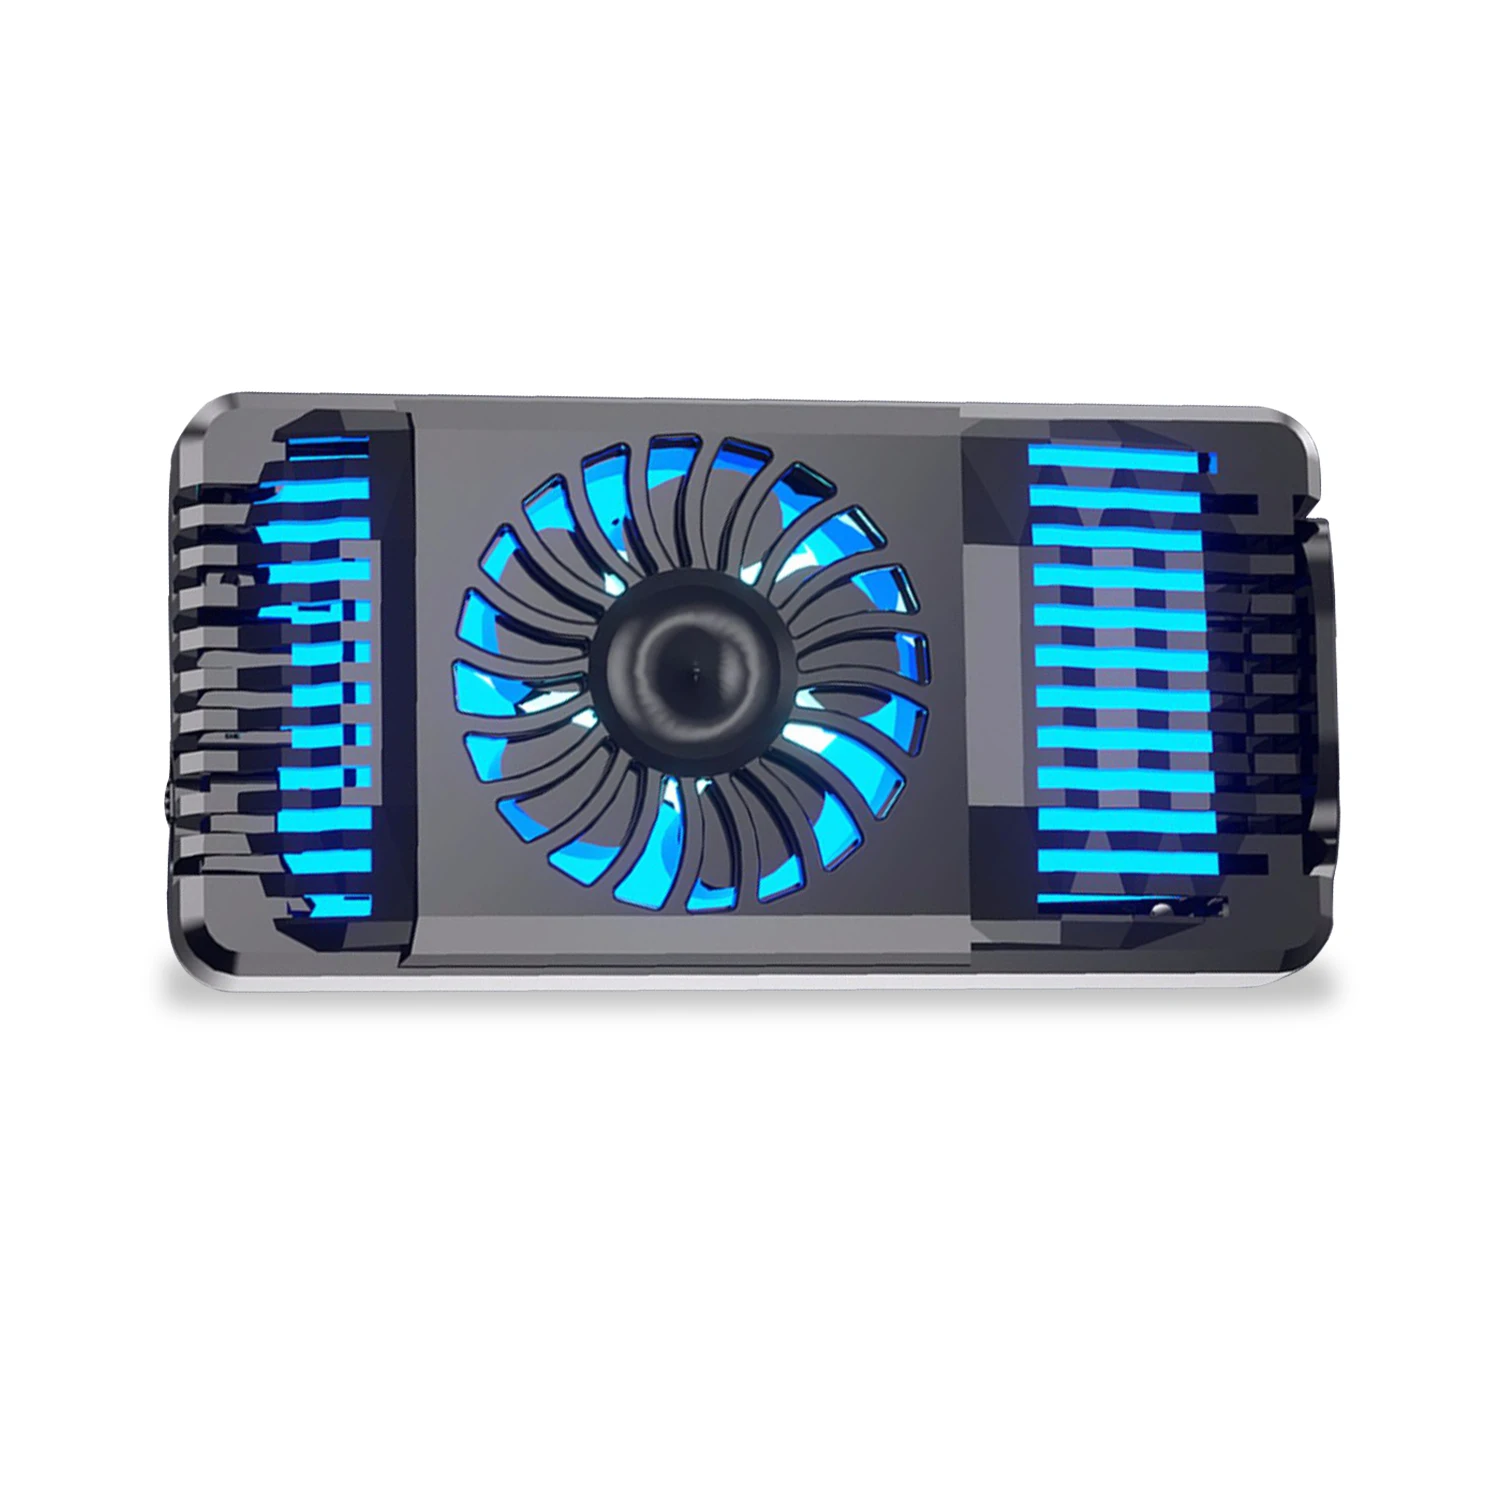 

Phone Cooler Radiator for iPhone/Android Gaming Semiconductor Heatsink Cell Phone Cooling Fan, Black,silver